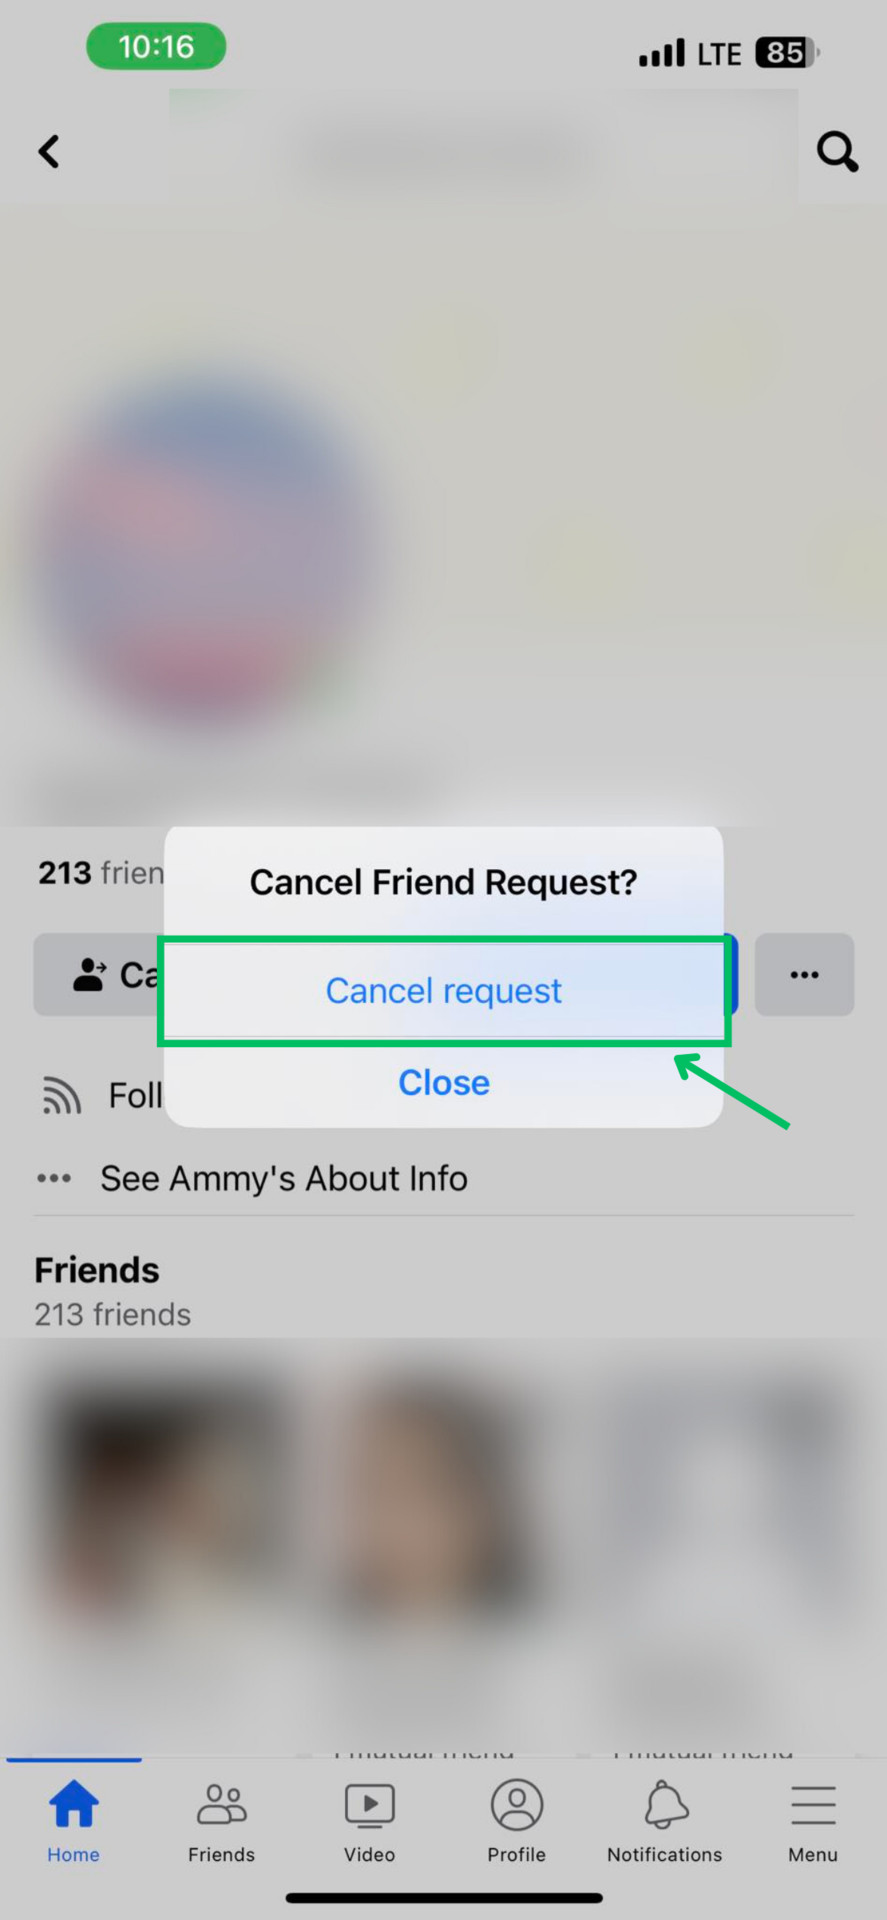 Confirm cancel request